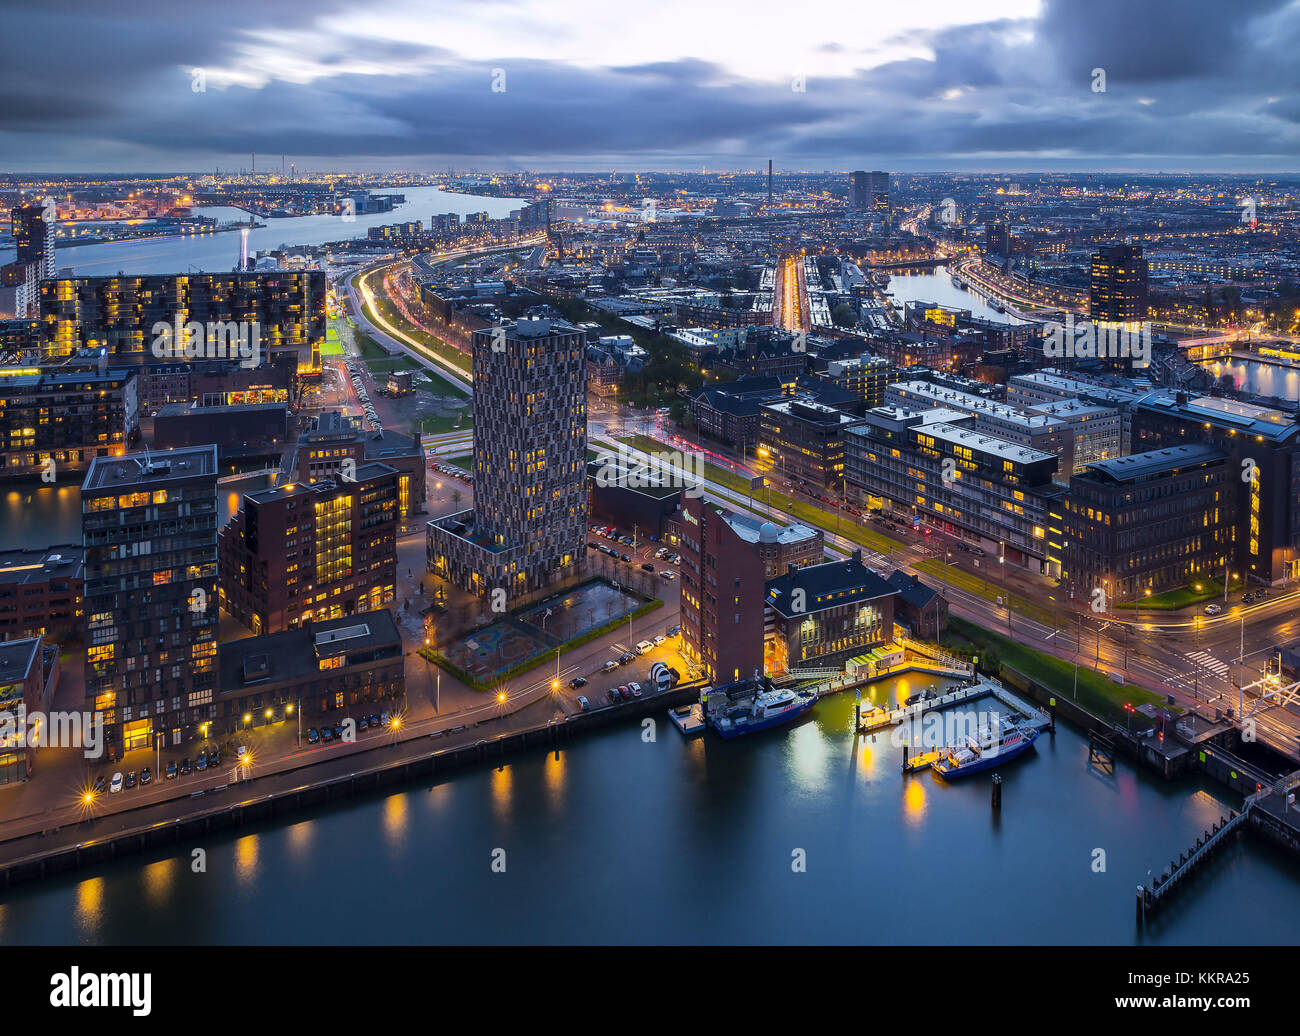 Rotterdam is a city in the Netherlands, located in South Holland. Stock Photo